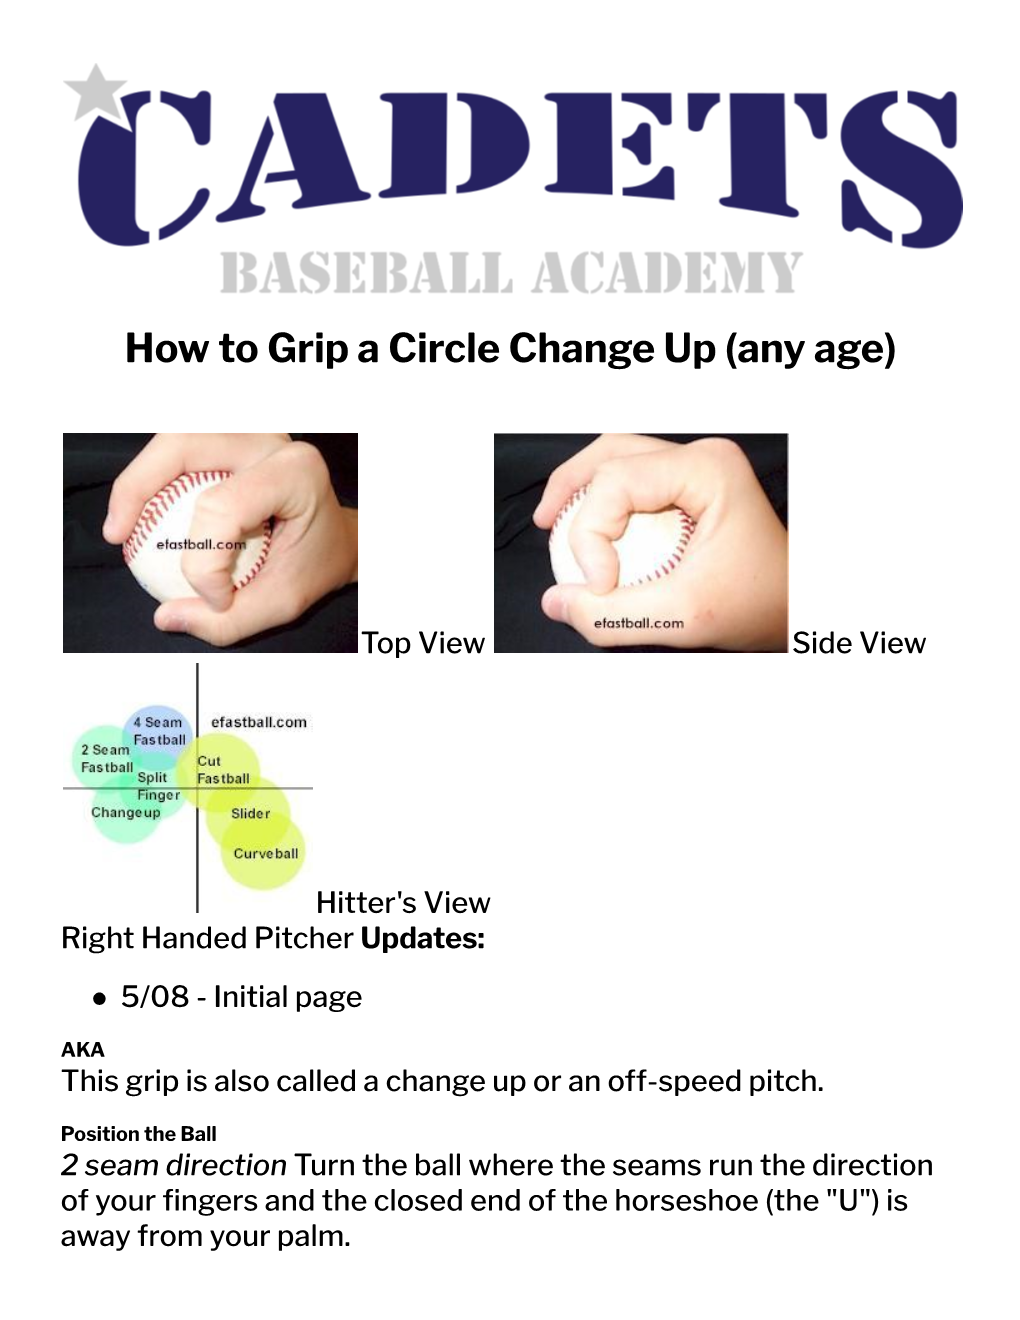 How to Grip a Circle Changeup